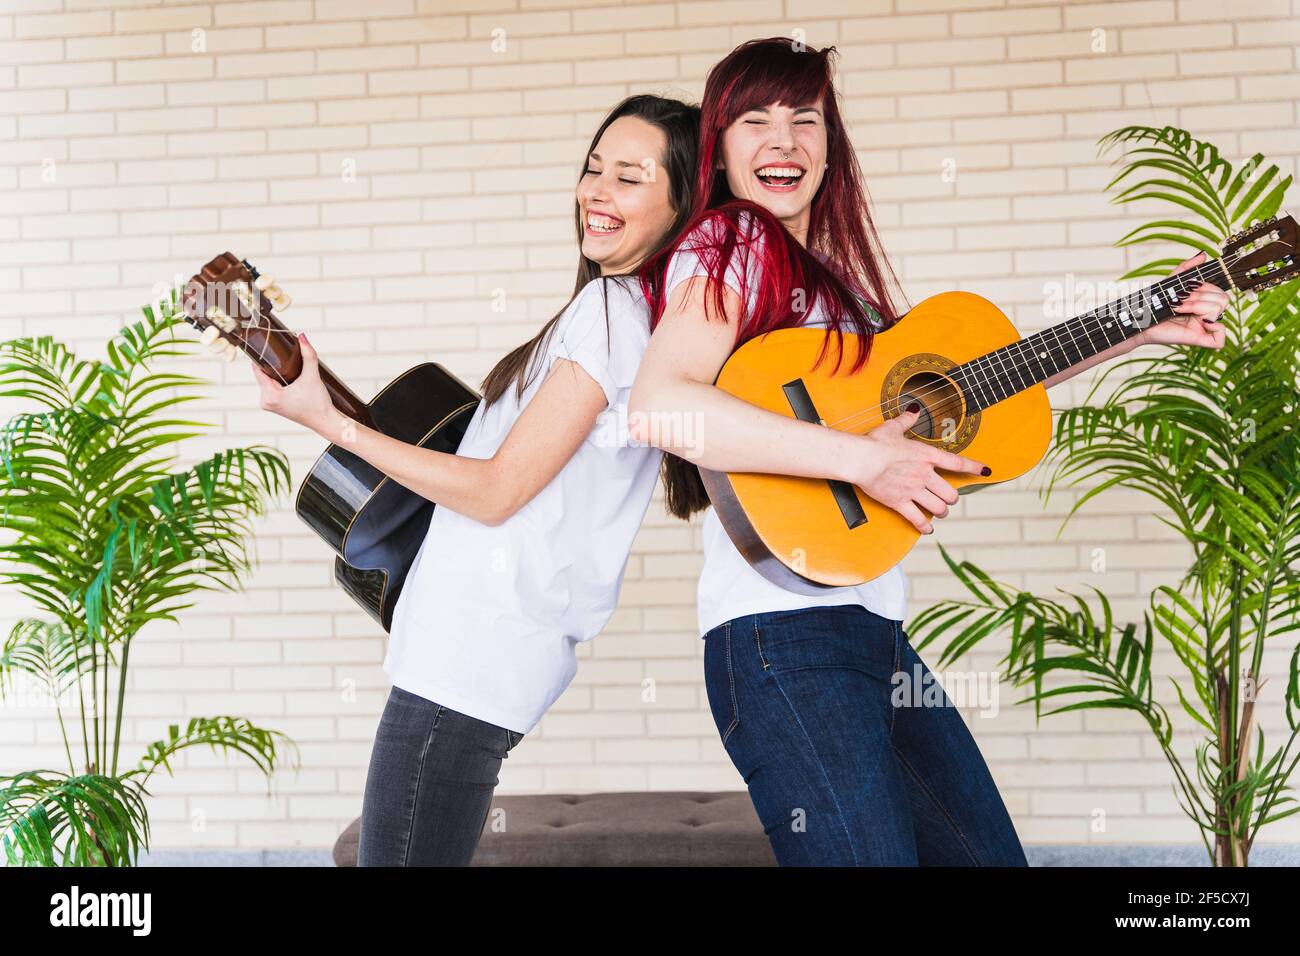 Side view of young women smiling and playing Spanish guitars while standing back to back against brick wall Stock Photo